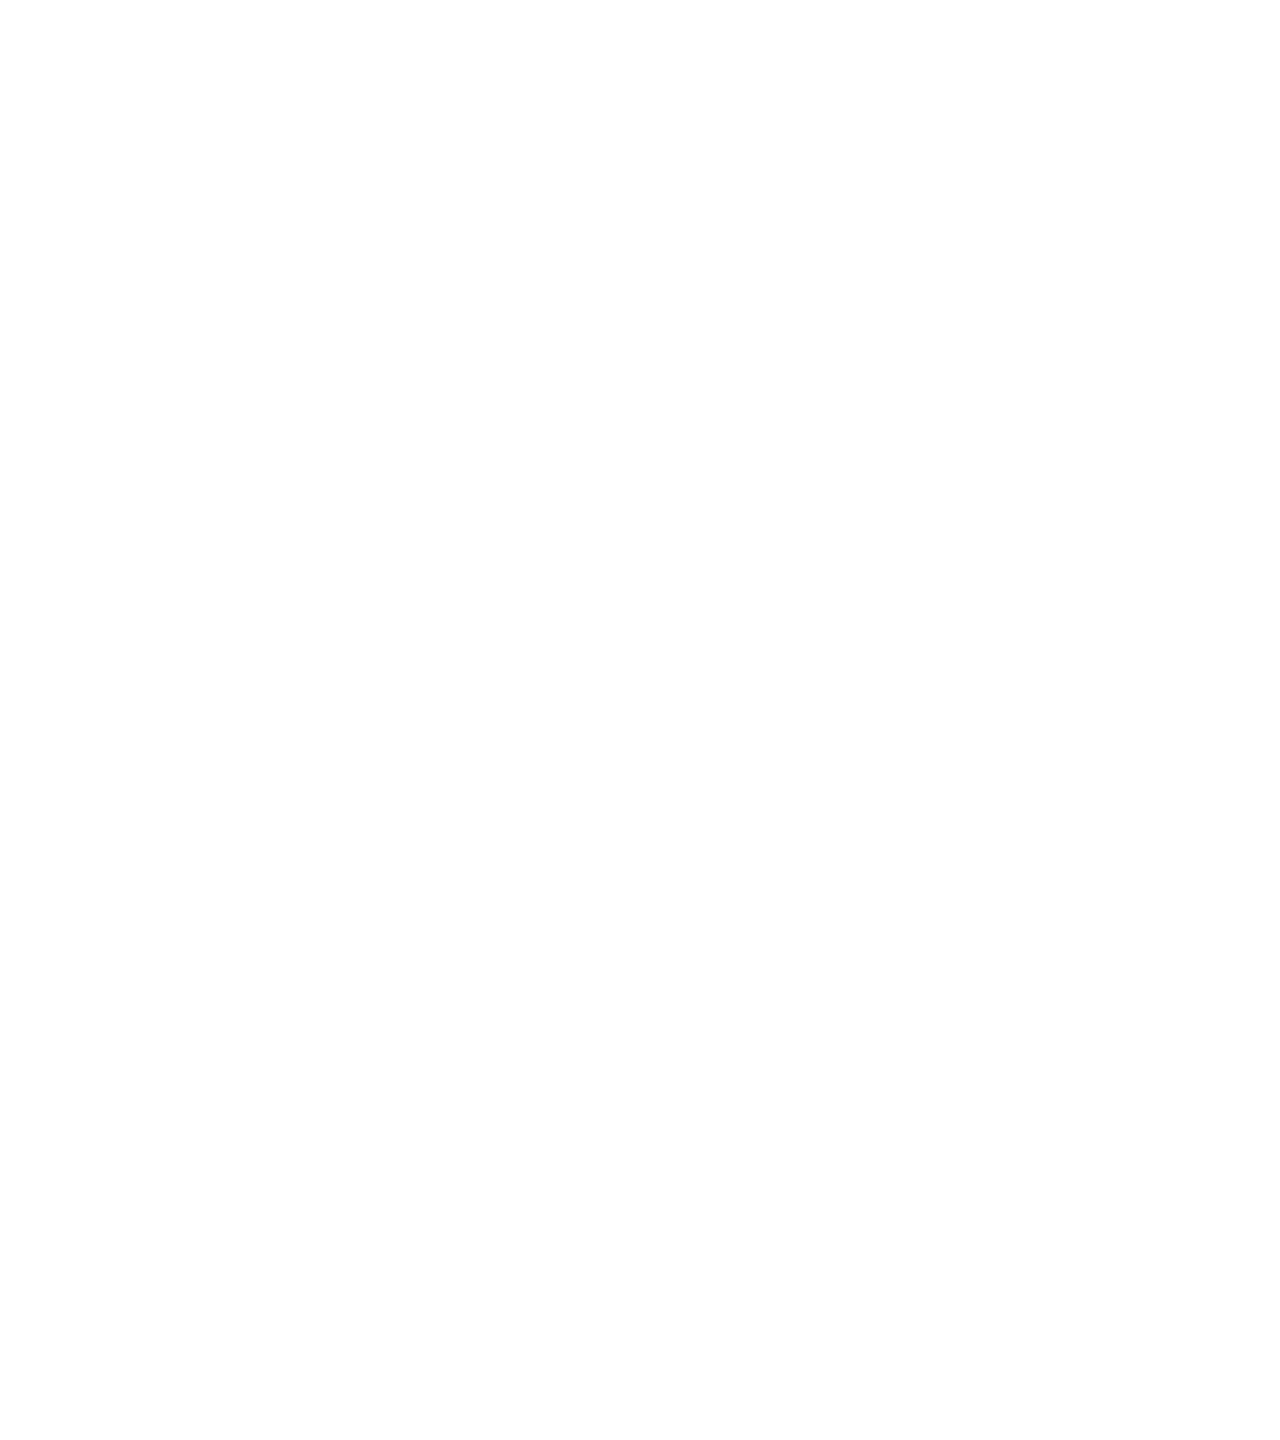 High-tech, from the field to the table